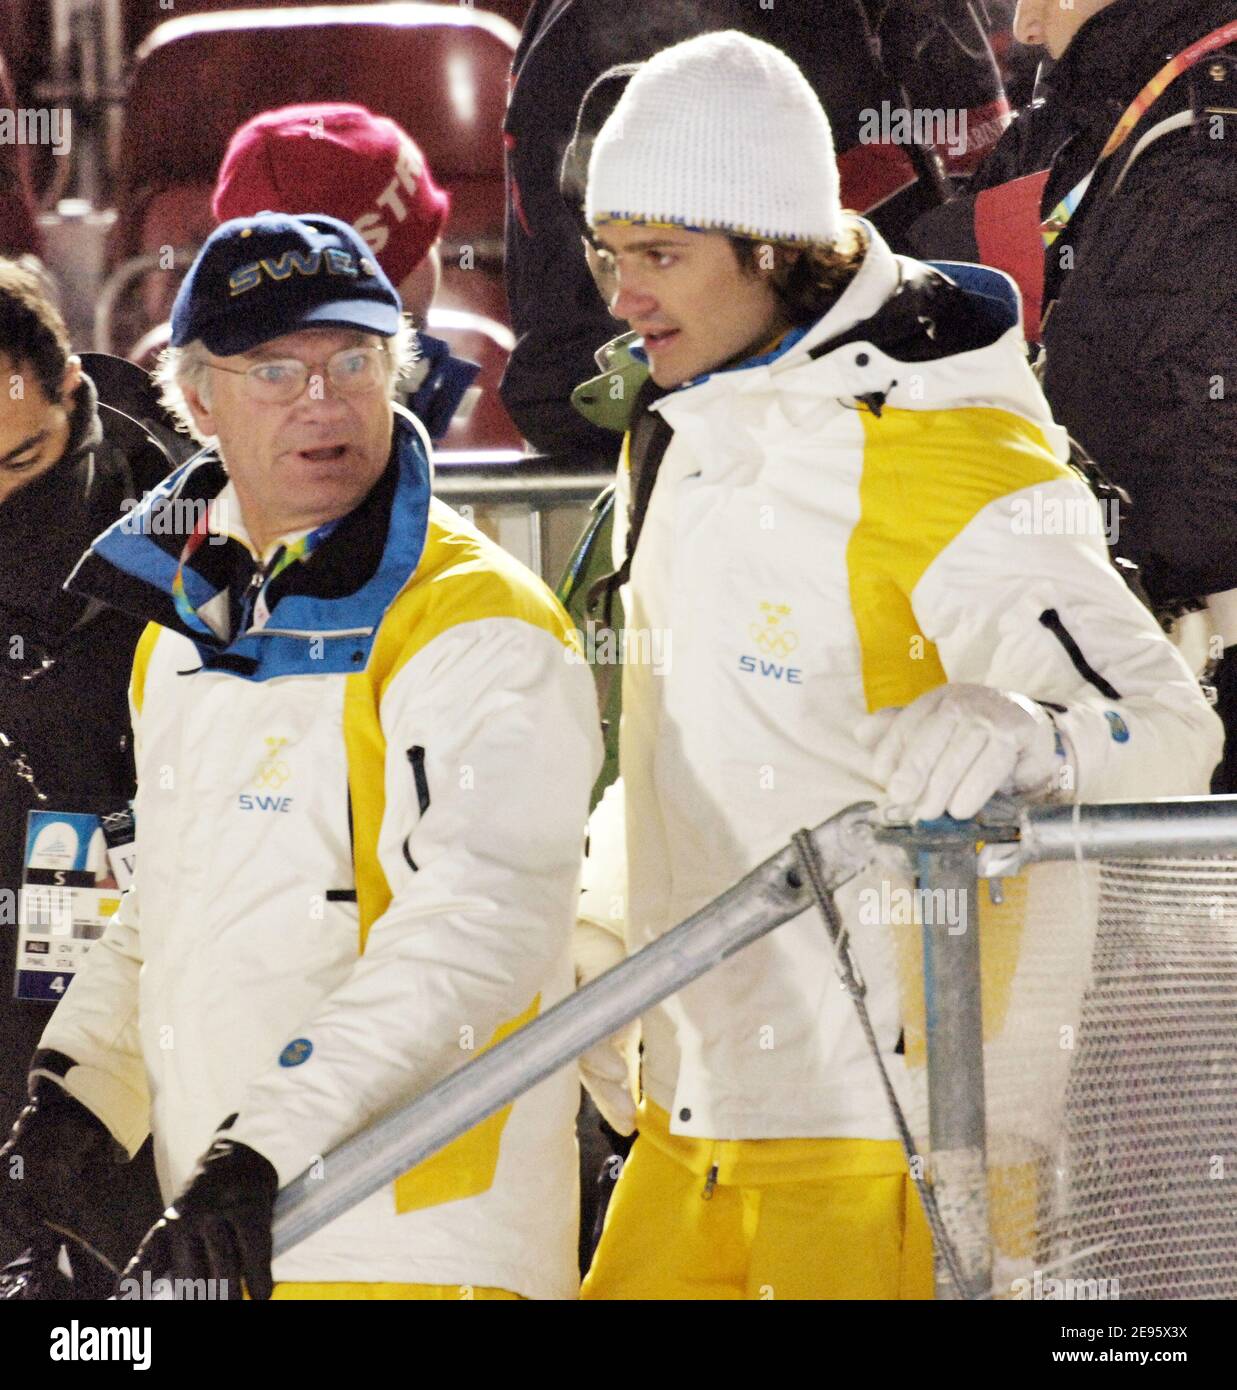 King Carl Gustav of Sweden and Prince Carl Philip attend the Alpine Skiing Men's Slalom at the Olympic Winter Games in Sestrieres, Italy, on February 25, 2006. Photo by Nicolas Gouhier/Cameleon/ABACAPRESS.COM Stock Photo